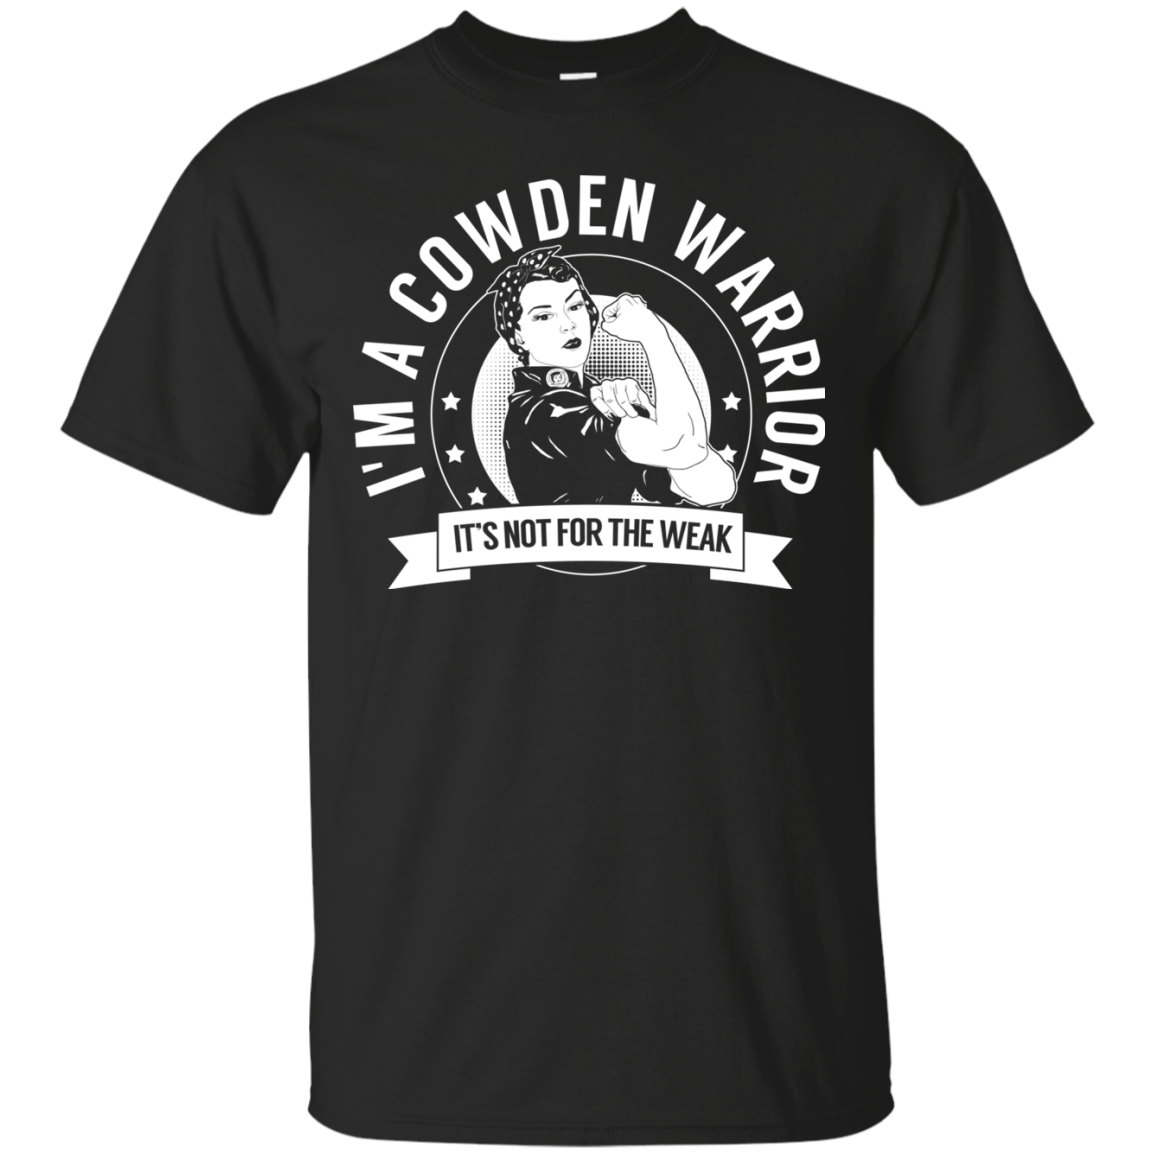 Cowden Syndrome - Cowden Warrior NFTW Unisex Shirt - The Unchargeables